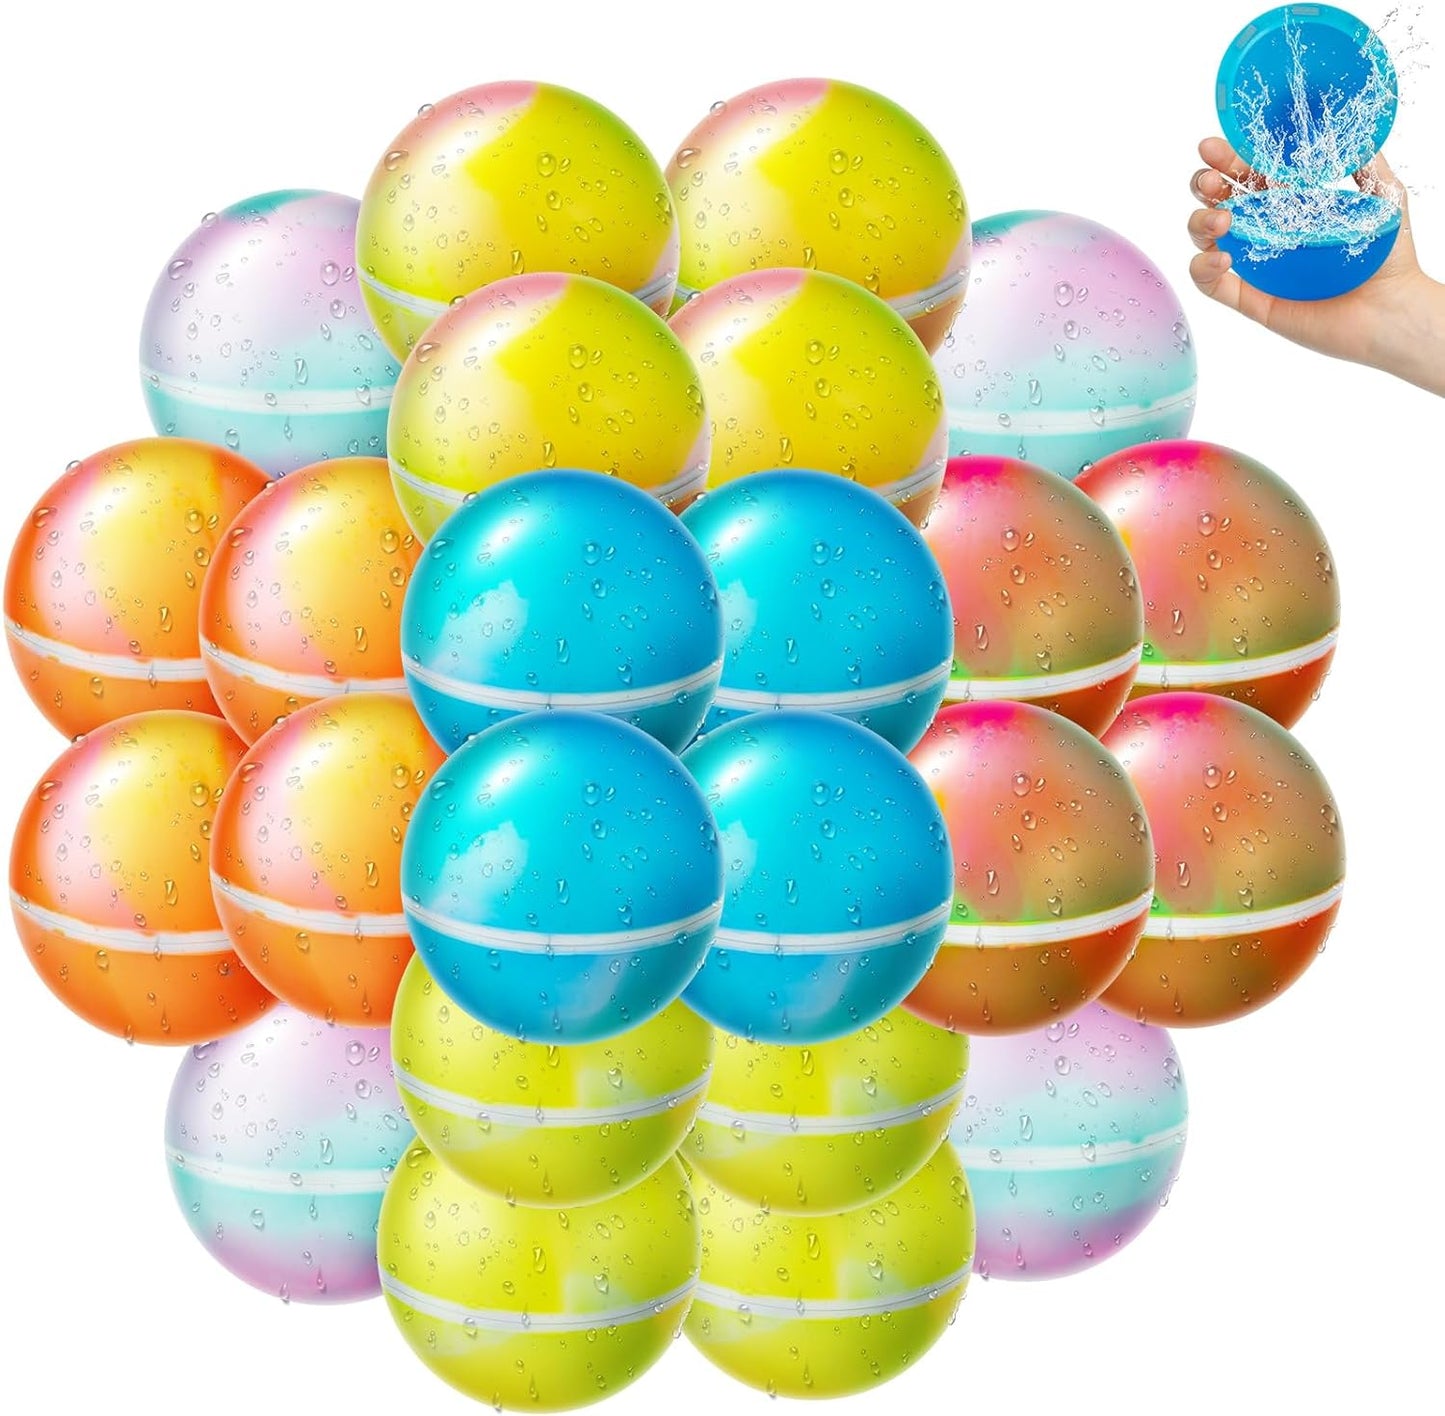 12 PCS Reusable Water Balloons Water Balls,Bbiodegradable Water Balloons,Soft Silicone Water Balloons Self Sealing Quick Fill Summer Games for Kids Outside,Summer Fun Party Gift